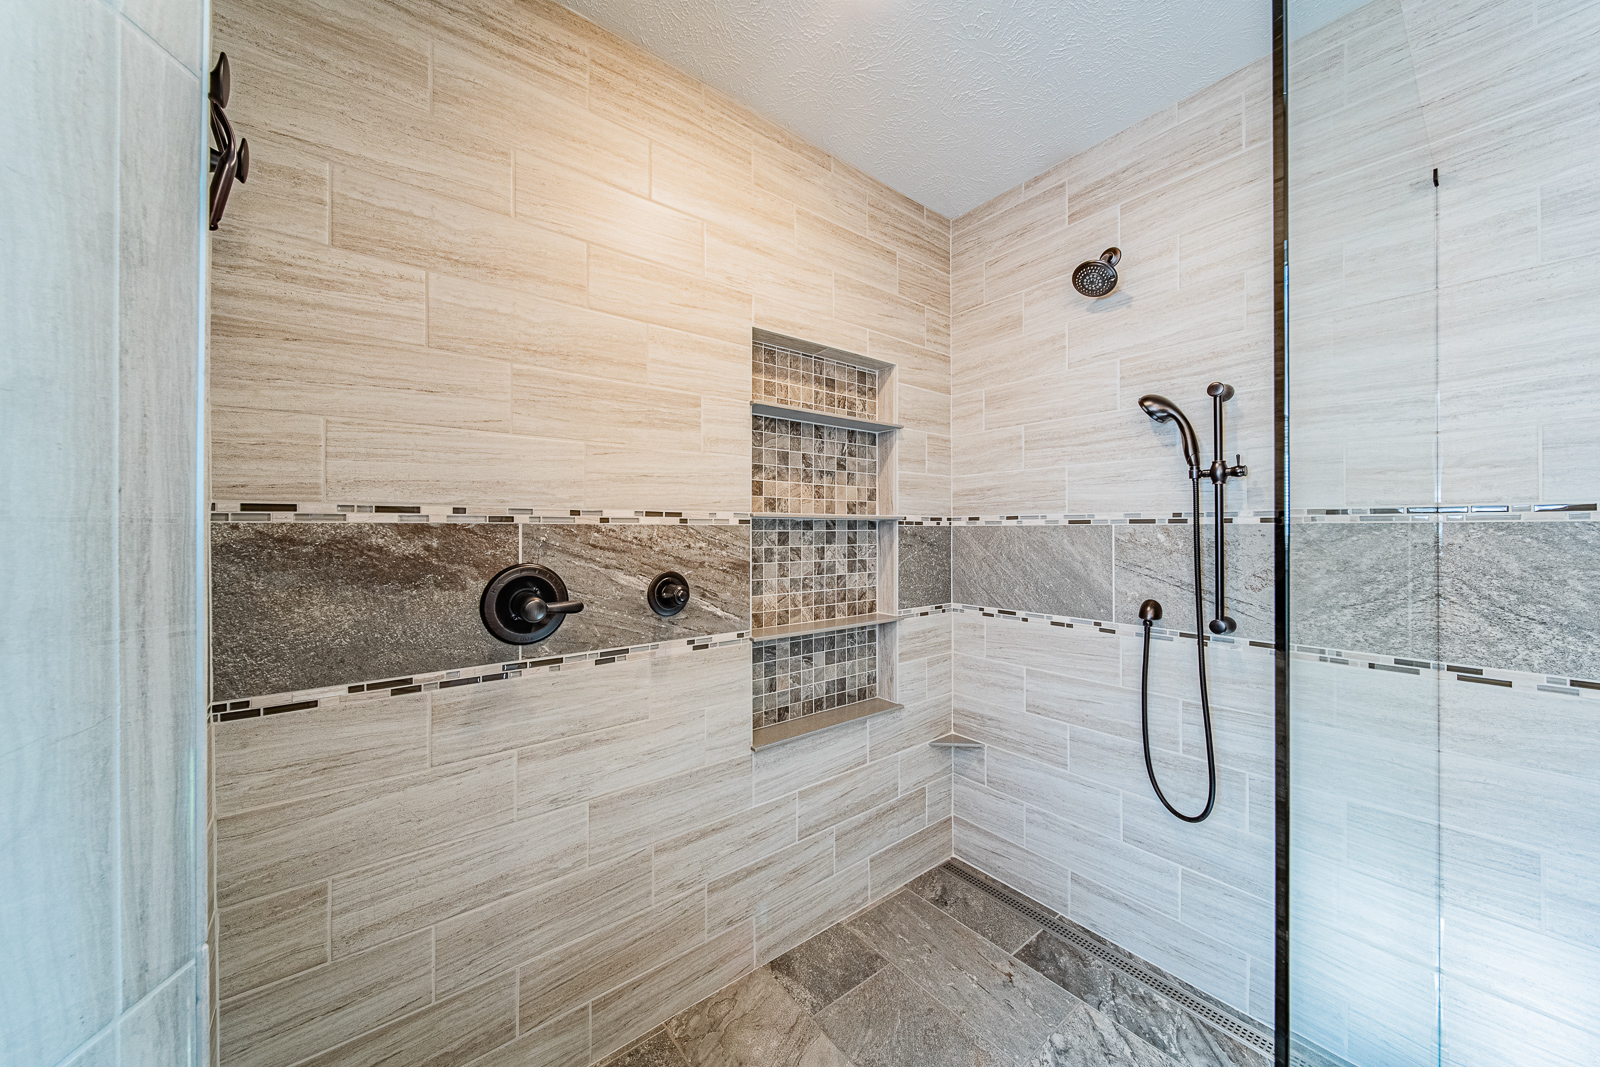 Modern shower with accessibility features in a Lafayette home's bathroom renovation.